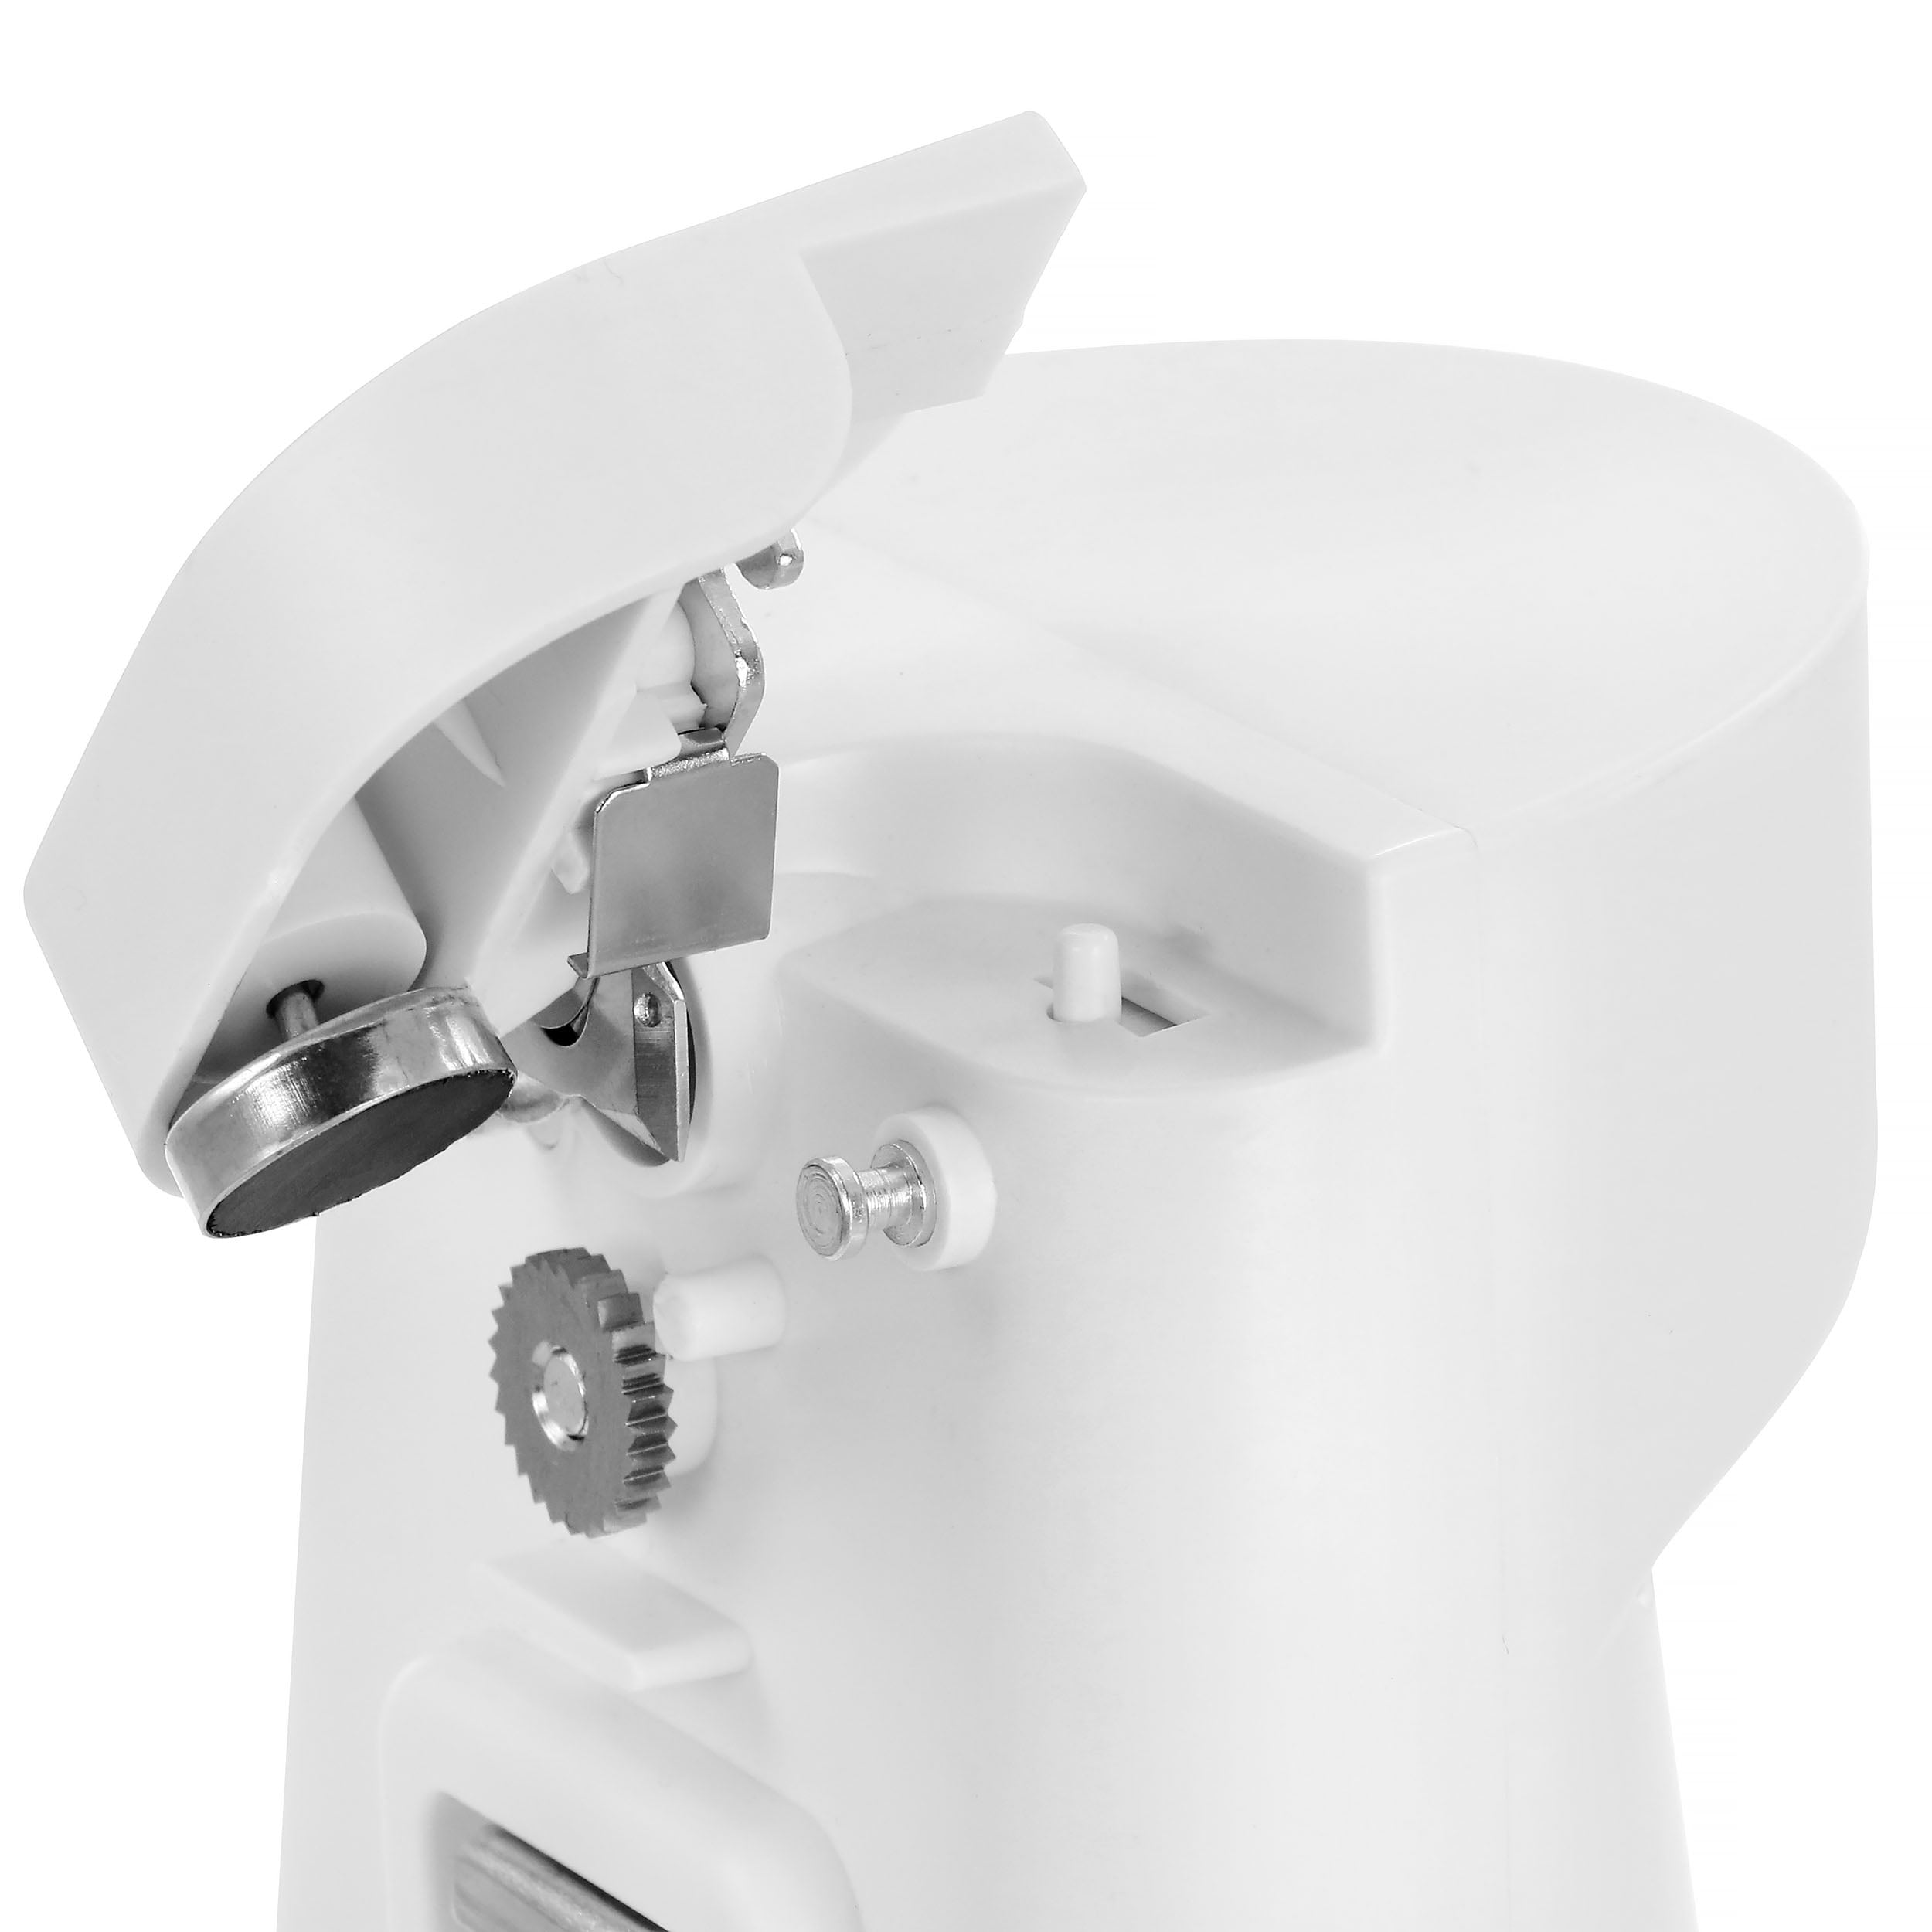 Basics Electric Can Opener, White